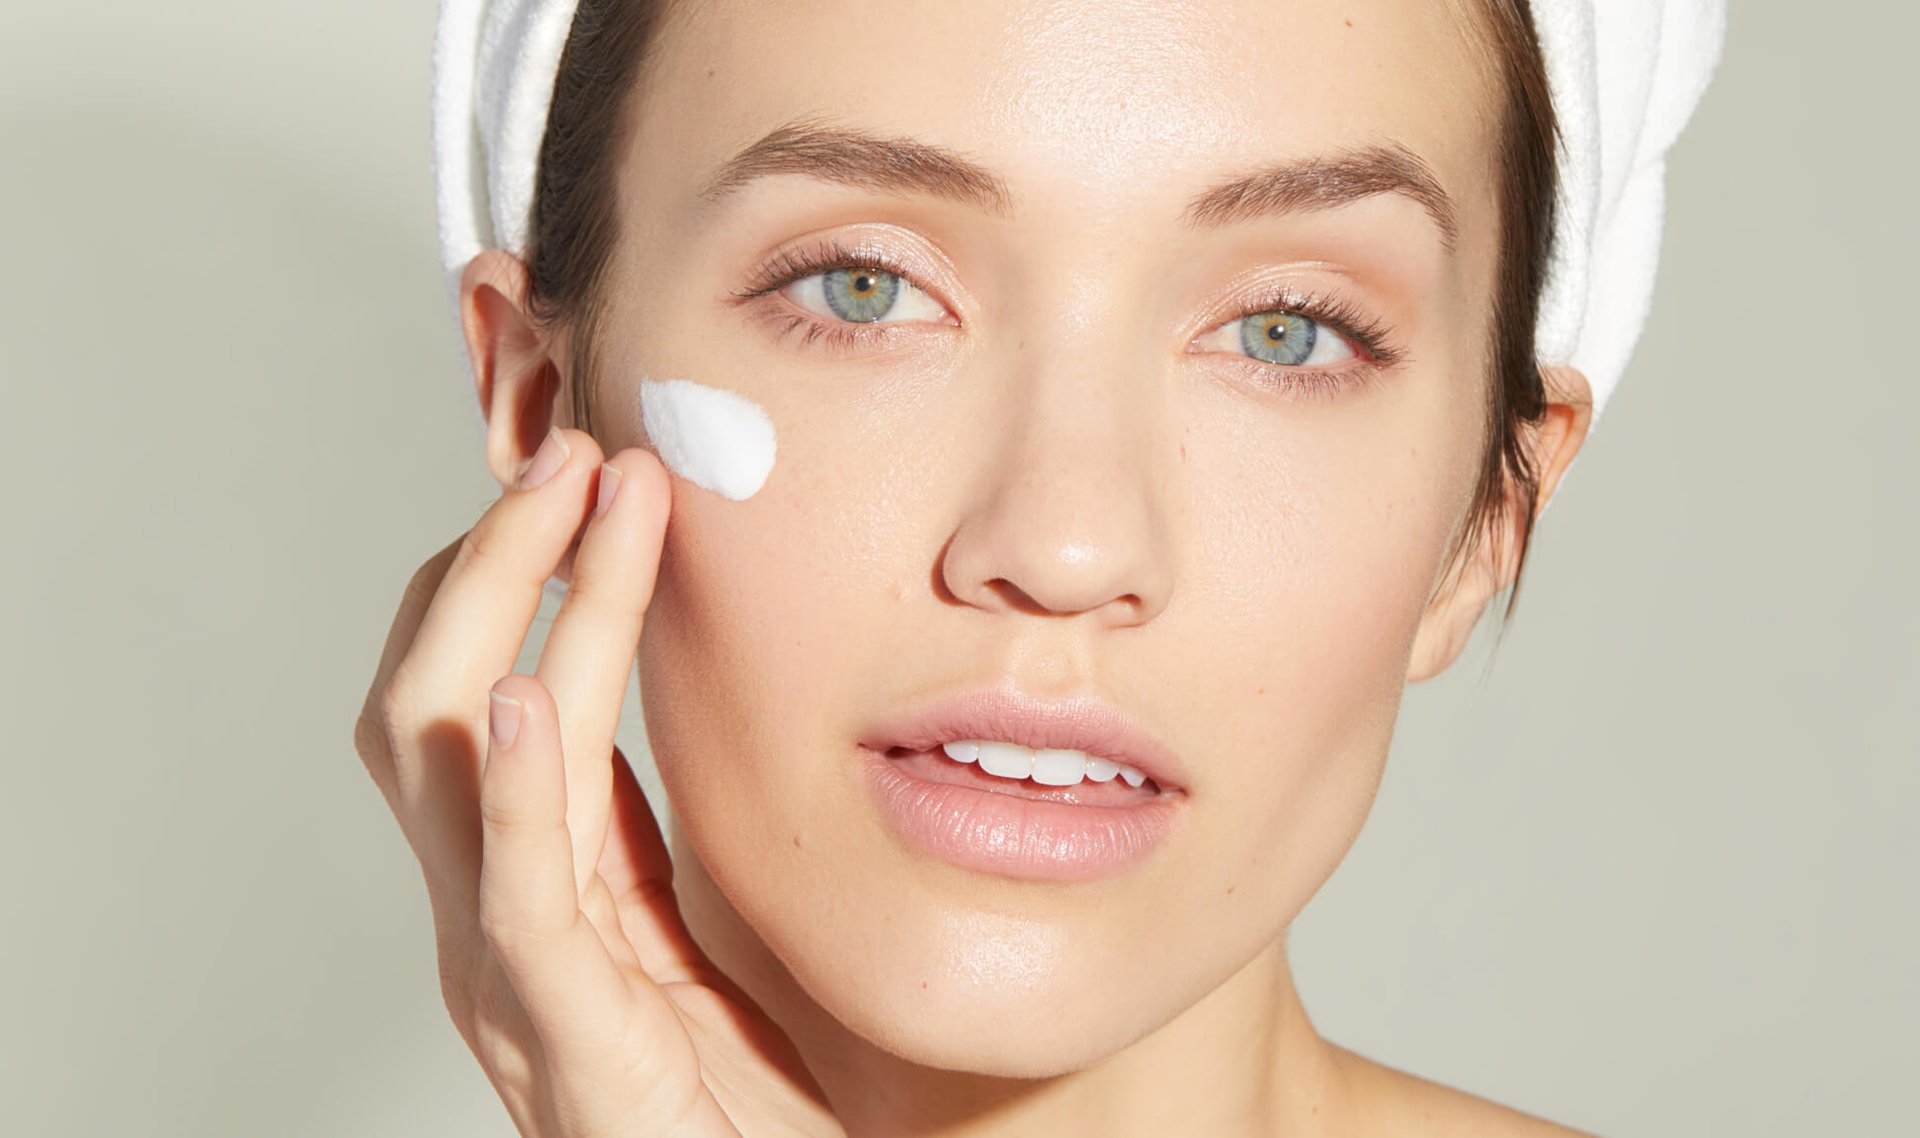 Adapalene: The Acne-Fighting Ingredient You’re Seeing Everywhere 